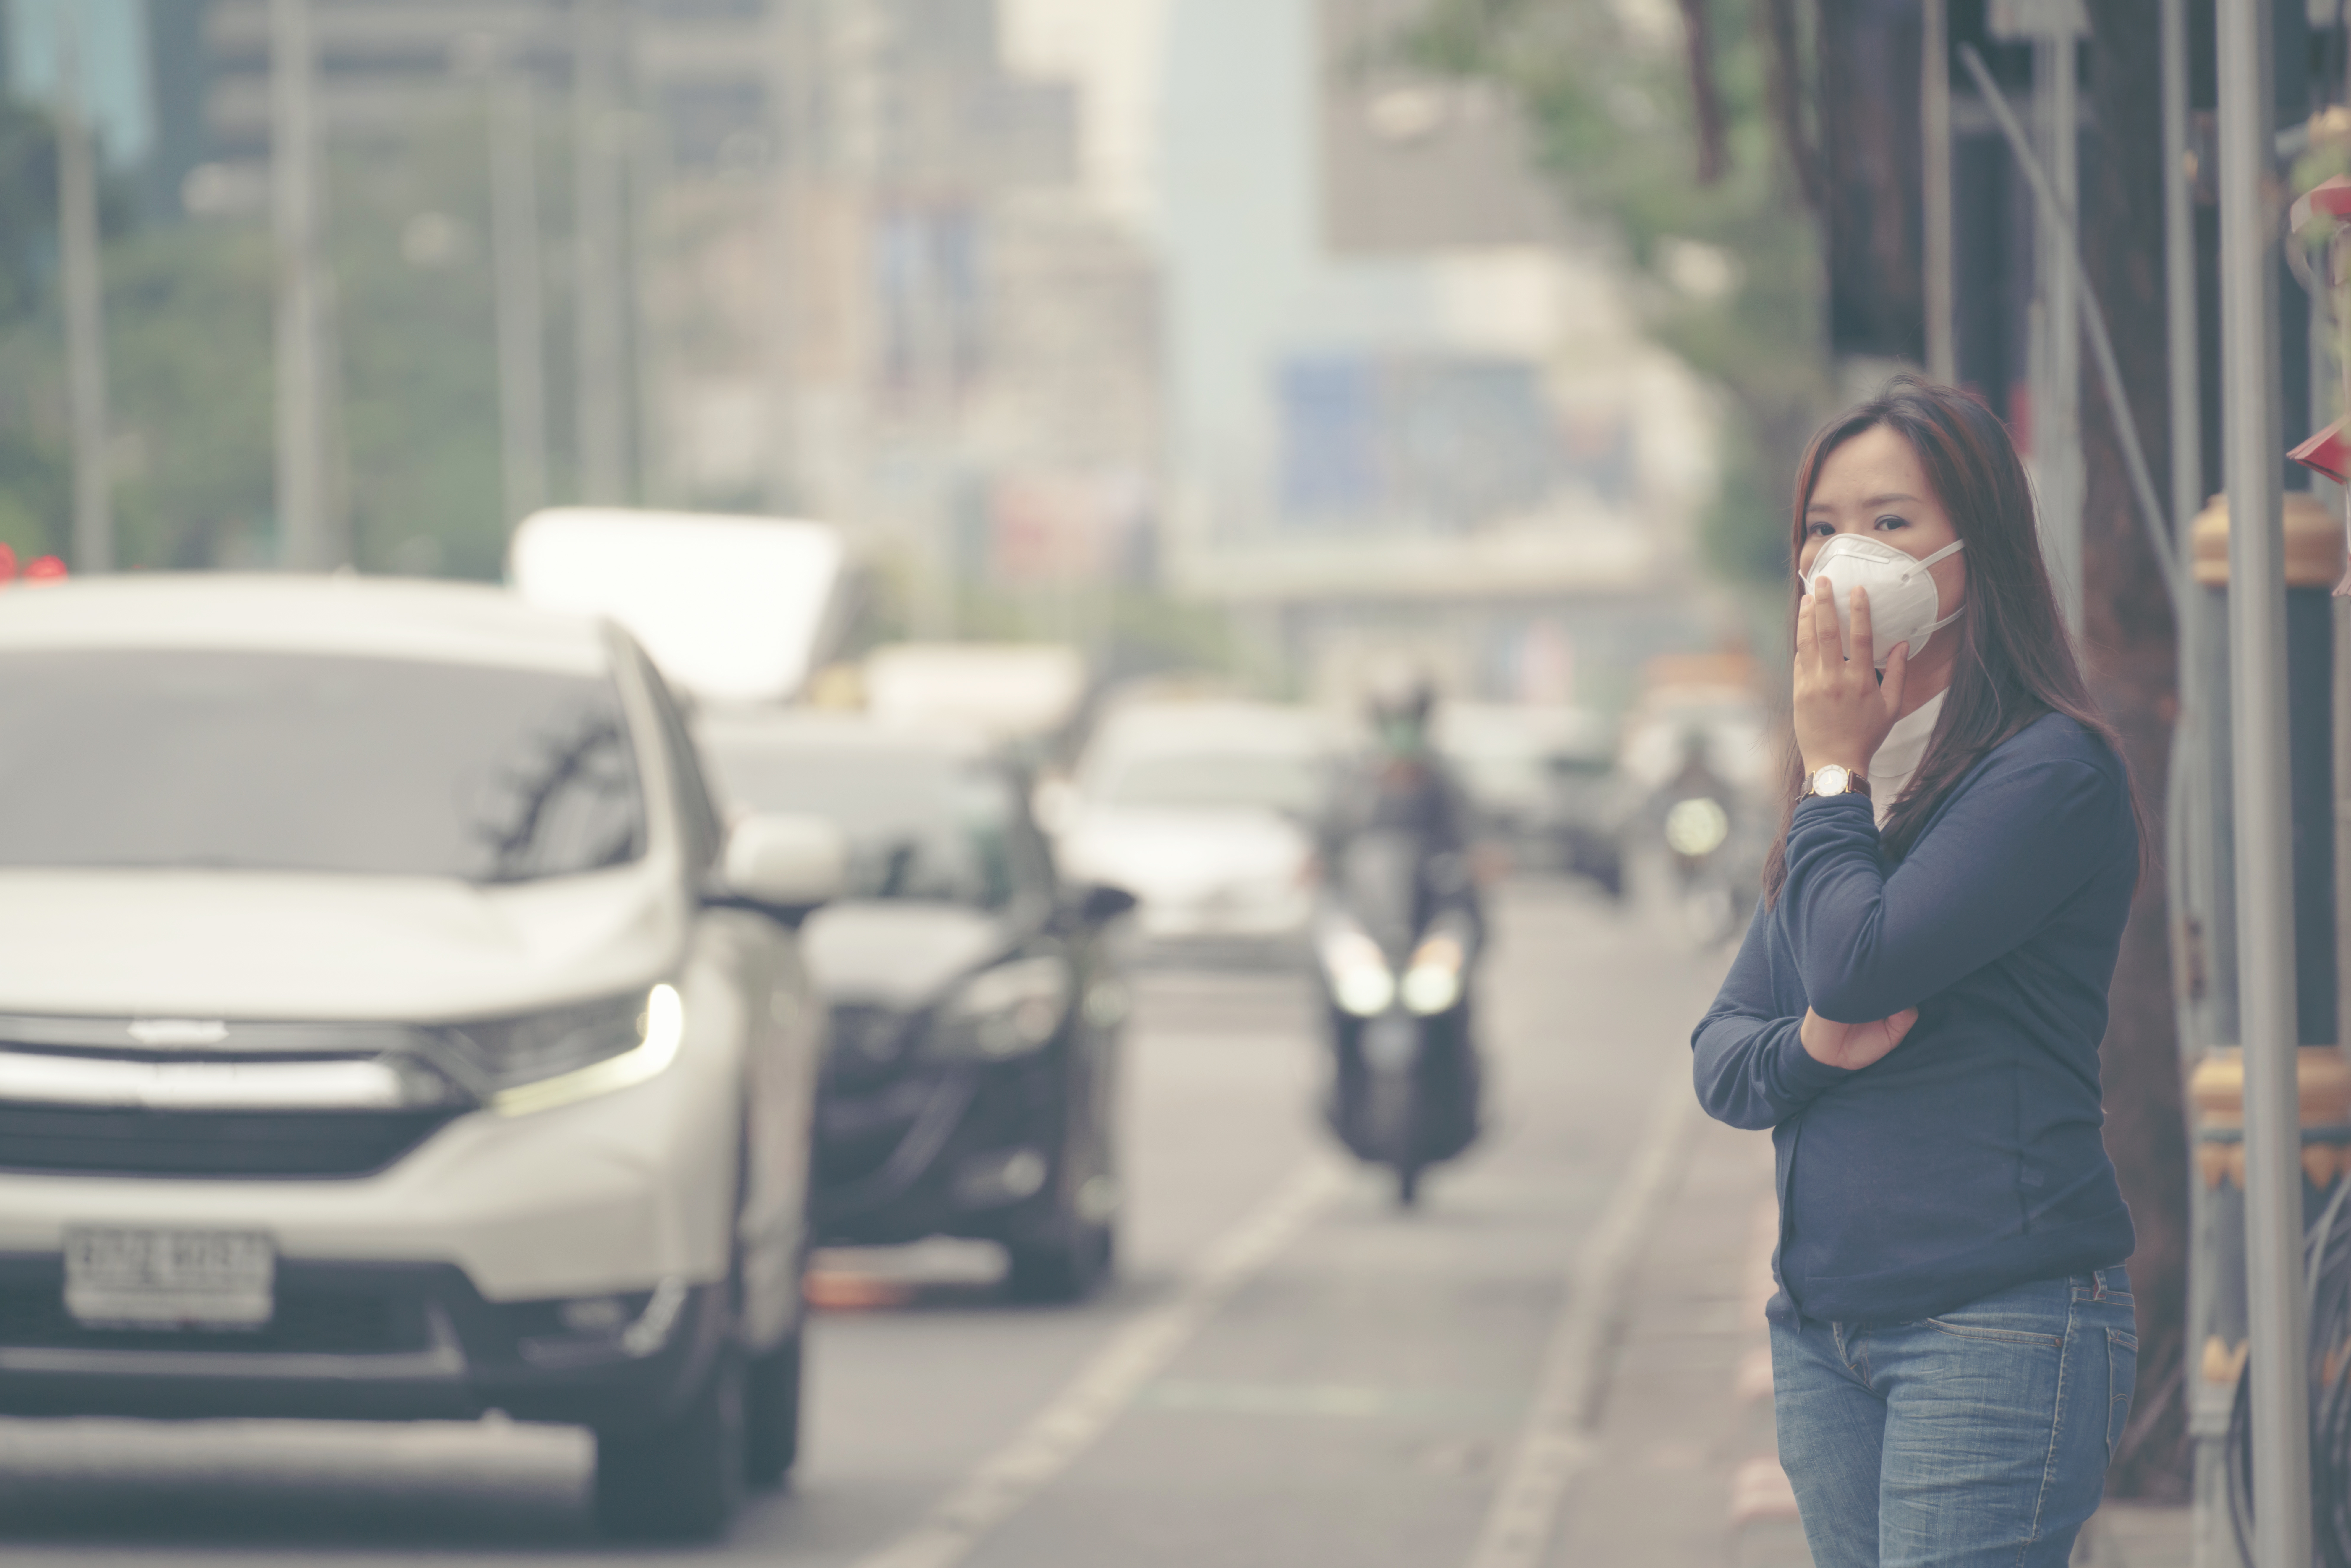 Air pollution could affect menstrual cycle function